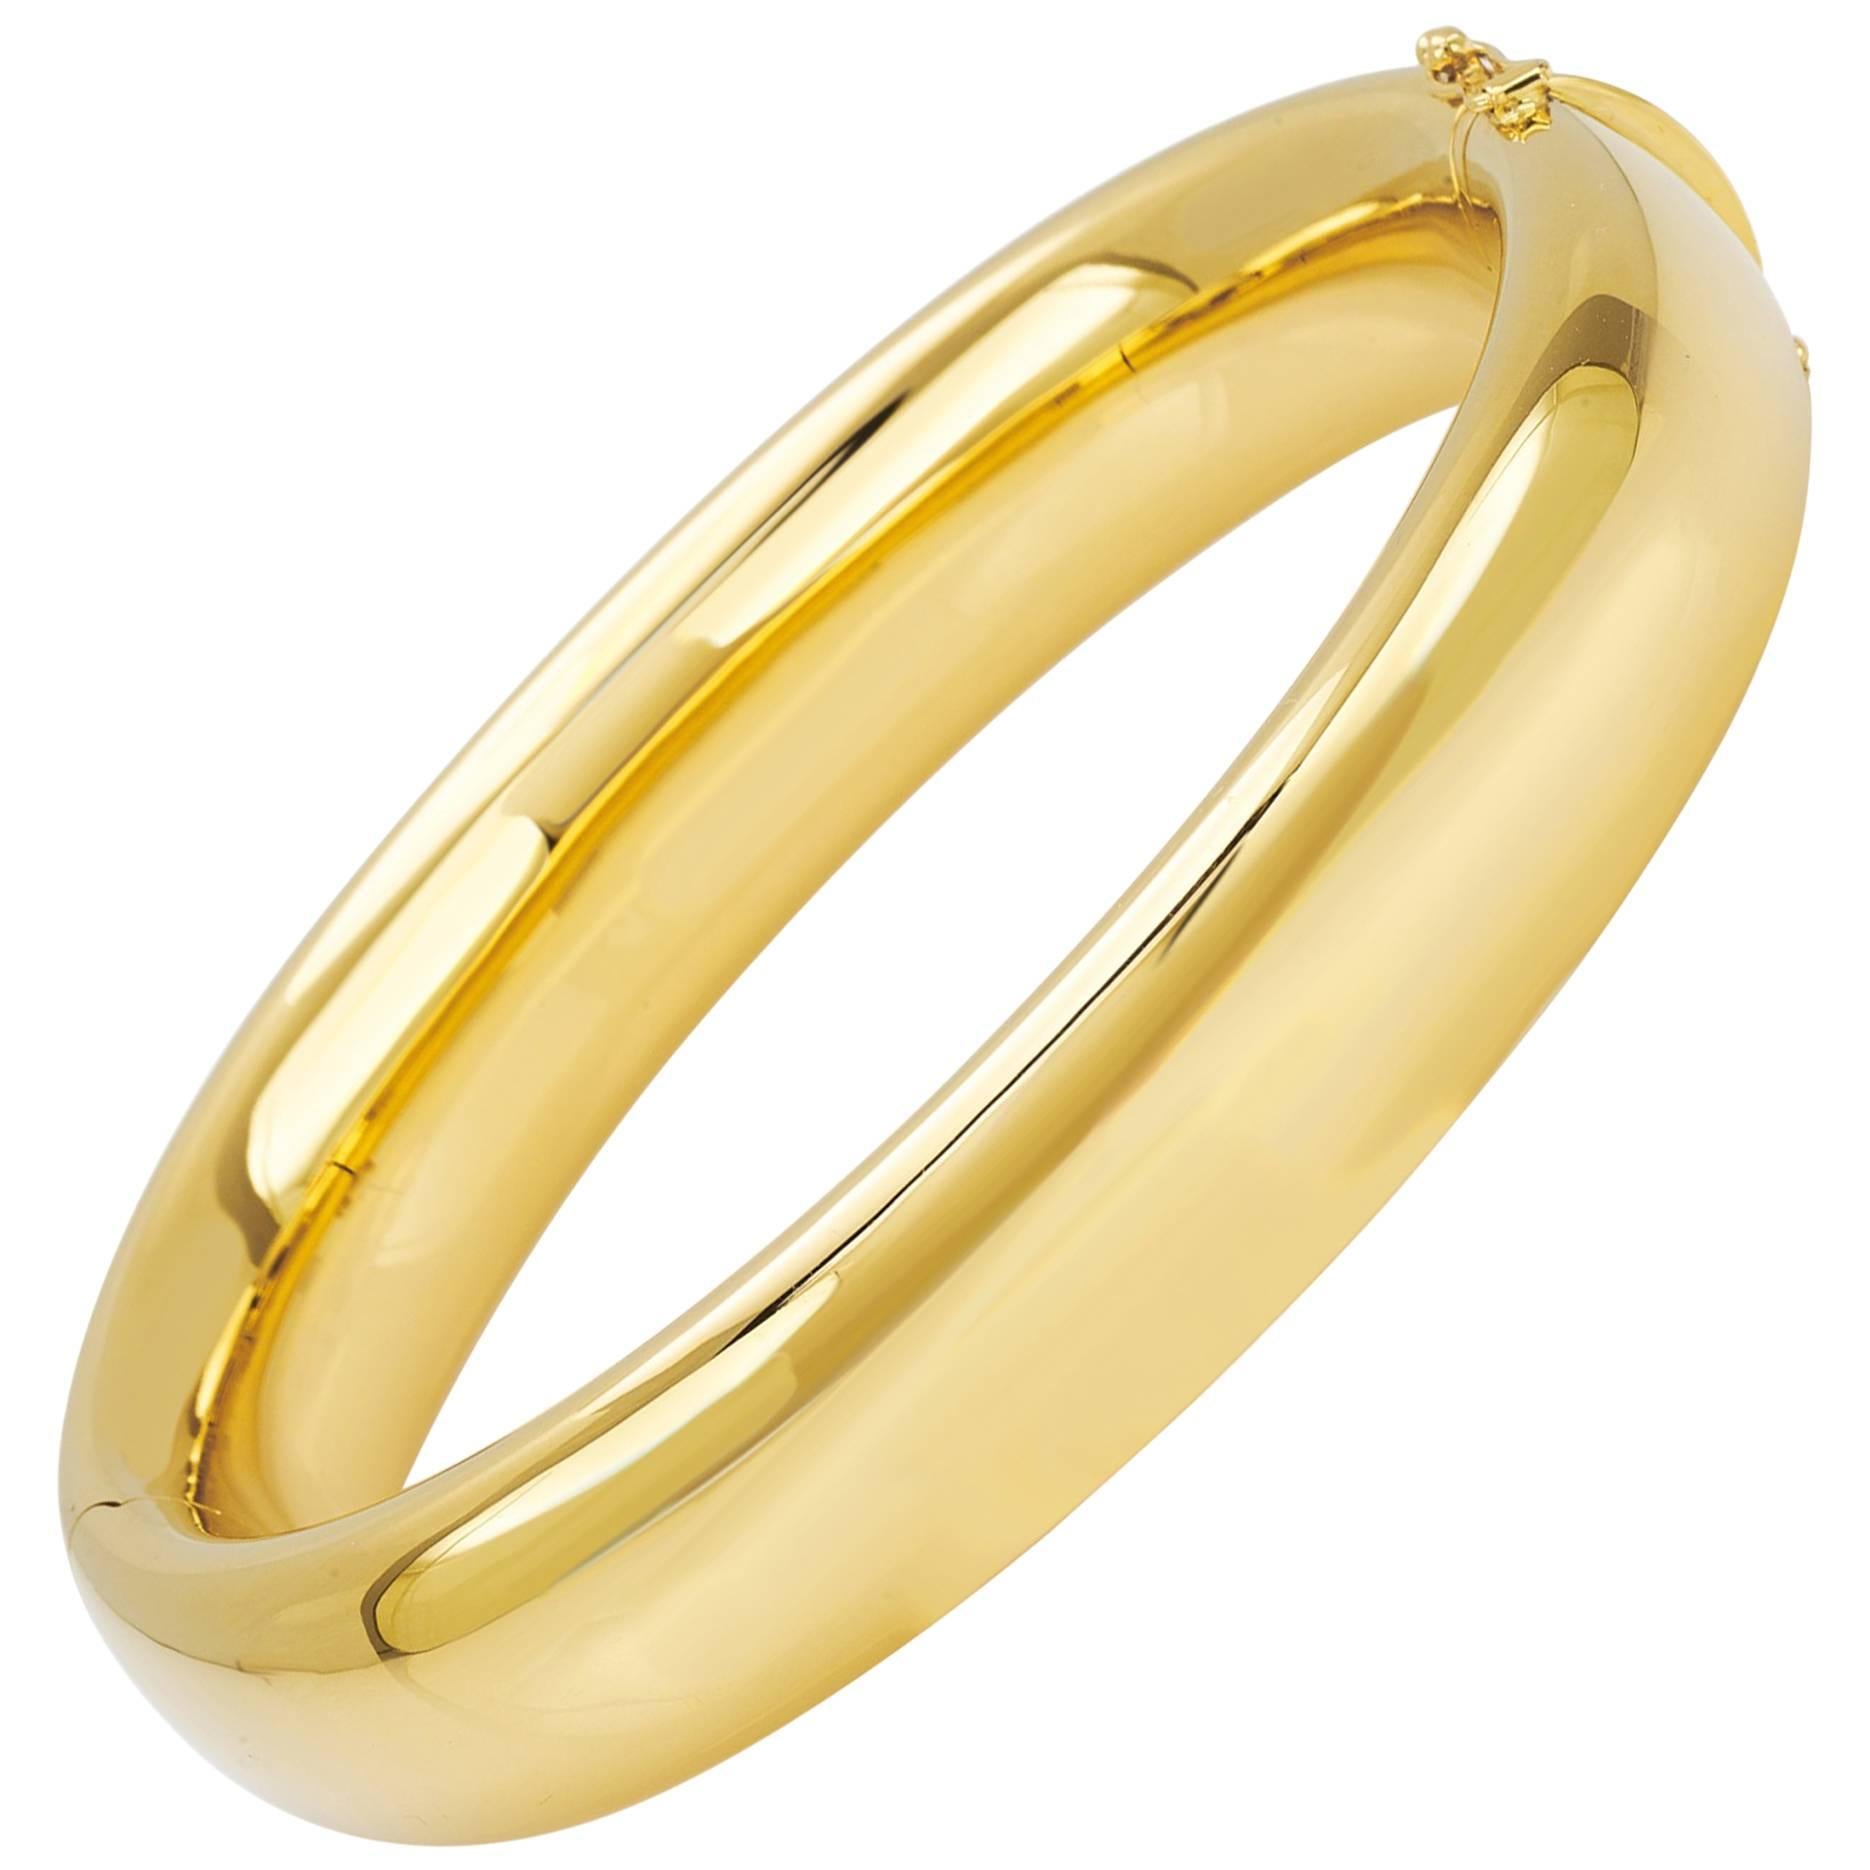 Bangle from the Collection "Essence" 18 Karat Yellow Gold